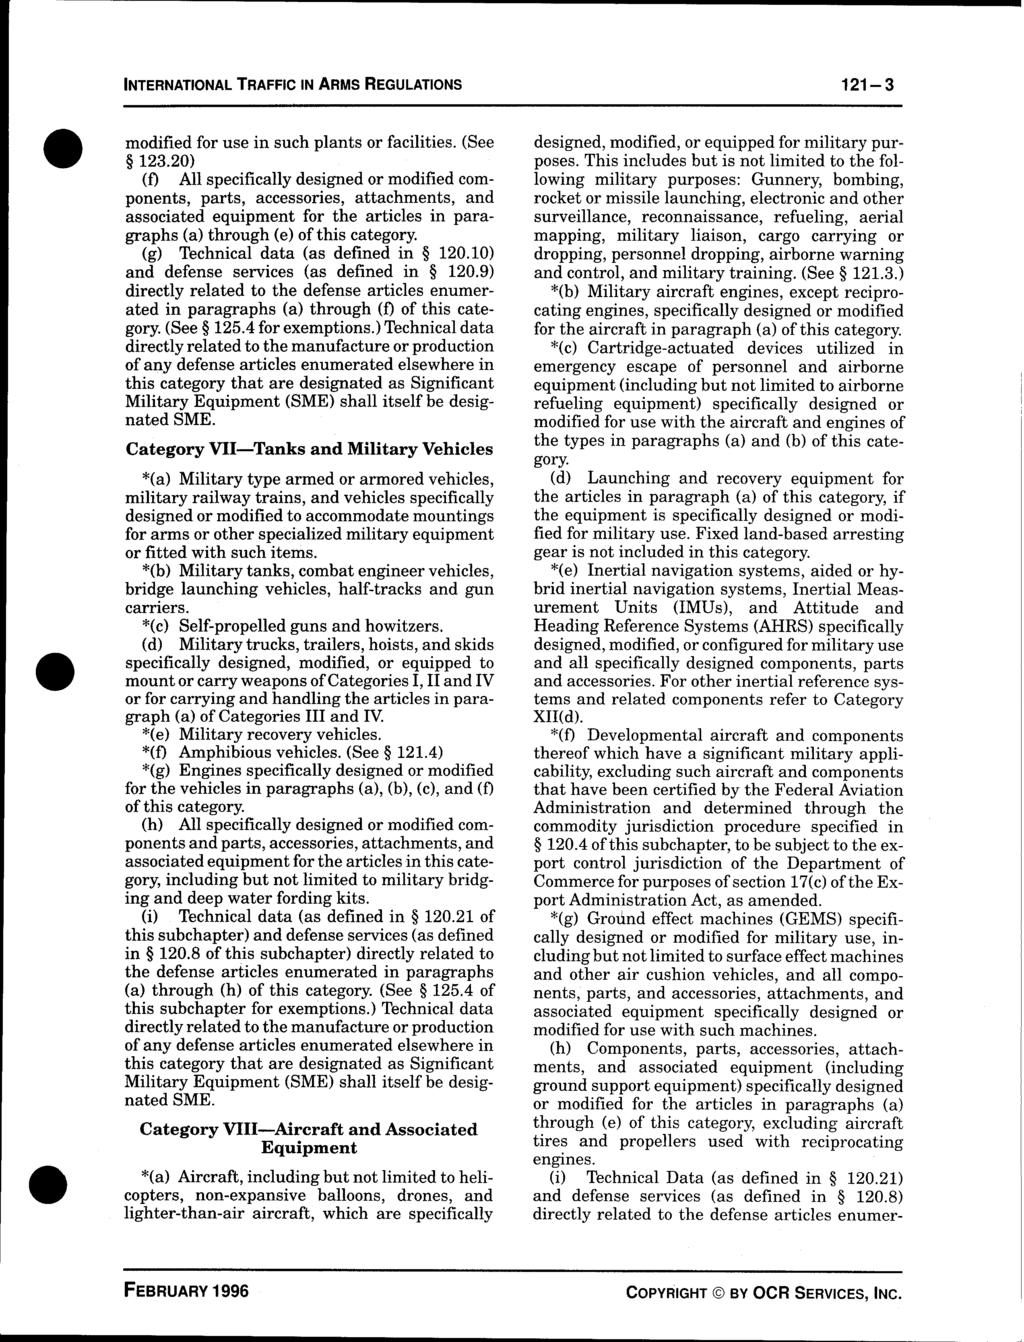 INTERNATIONAL TRAFFIC IN ARMS REGULATIONS 121-3 modified for use in such plants or facilities. (See 123.